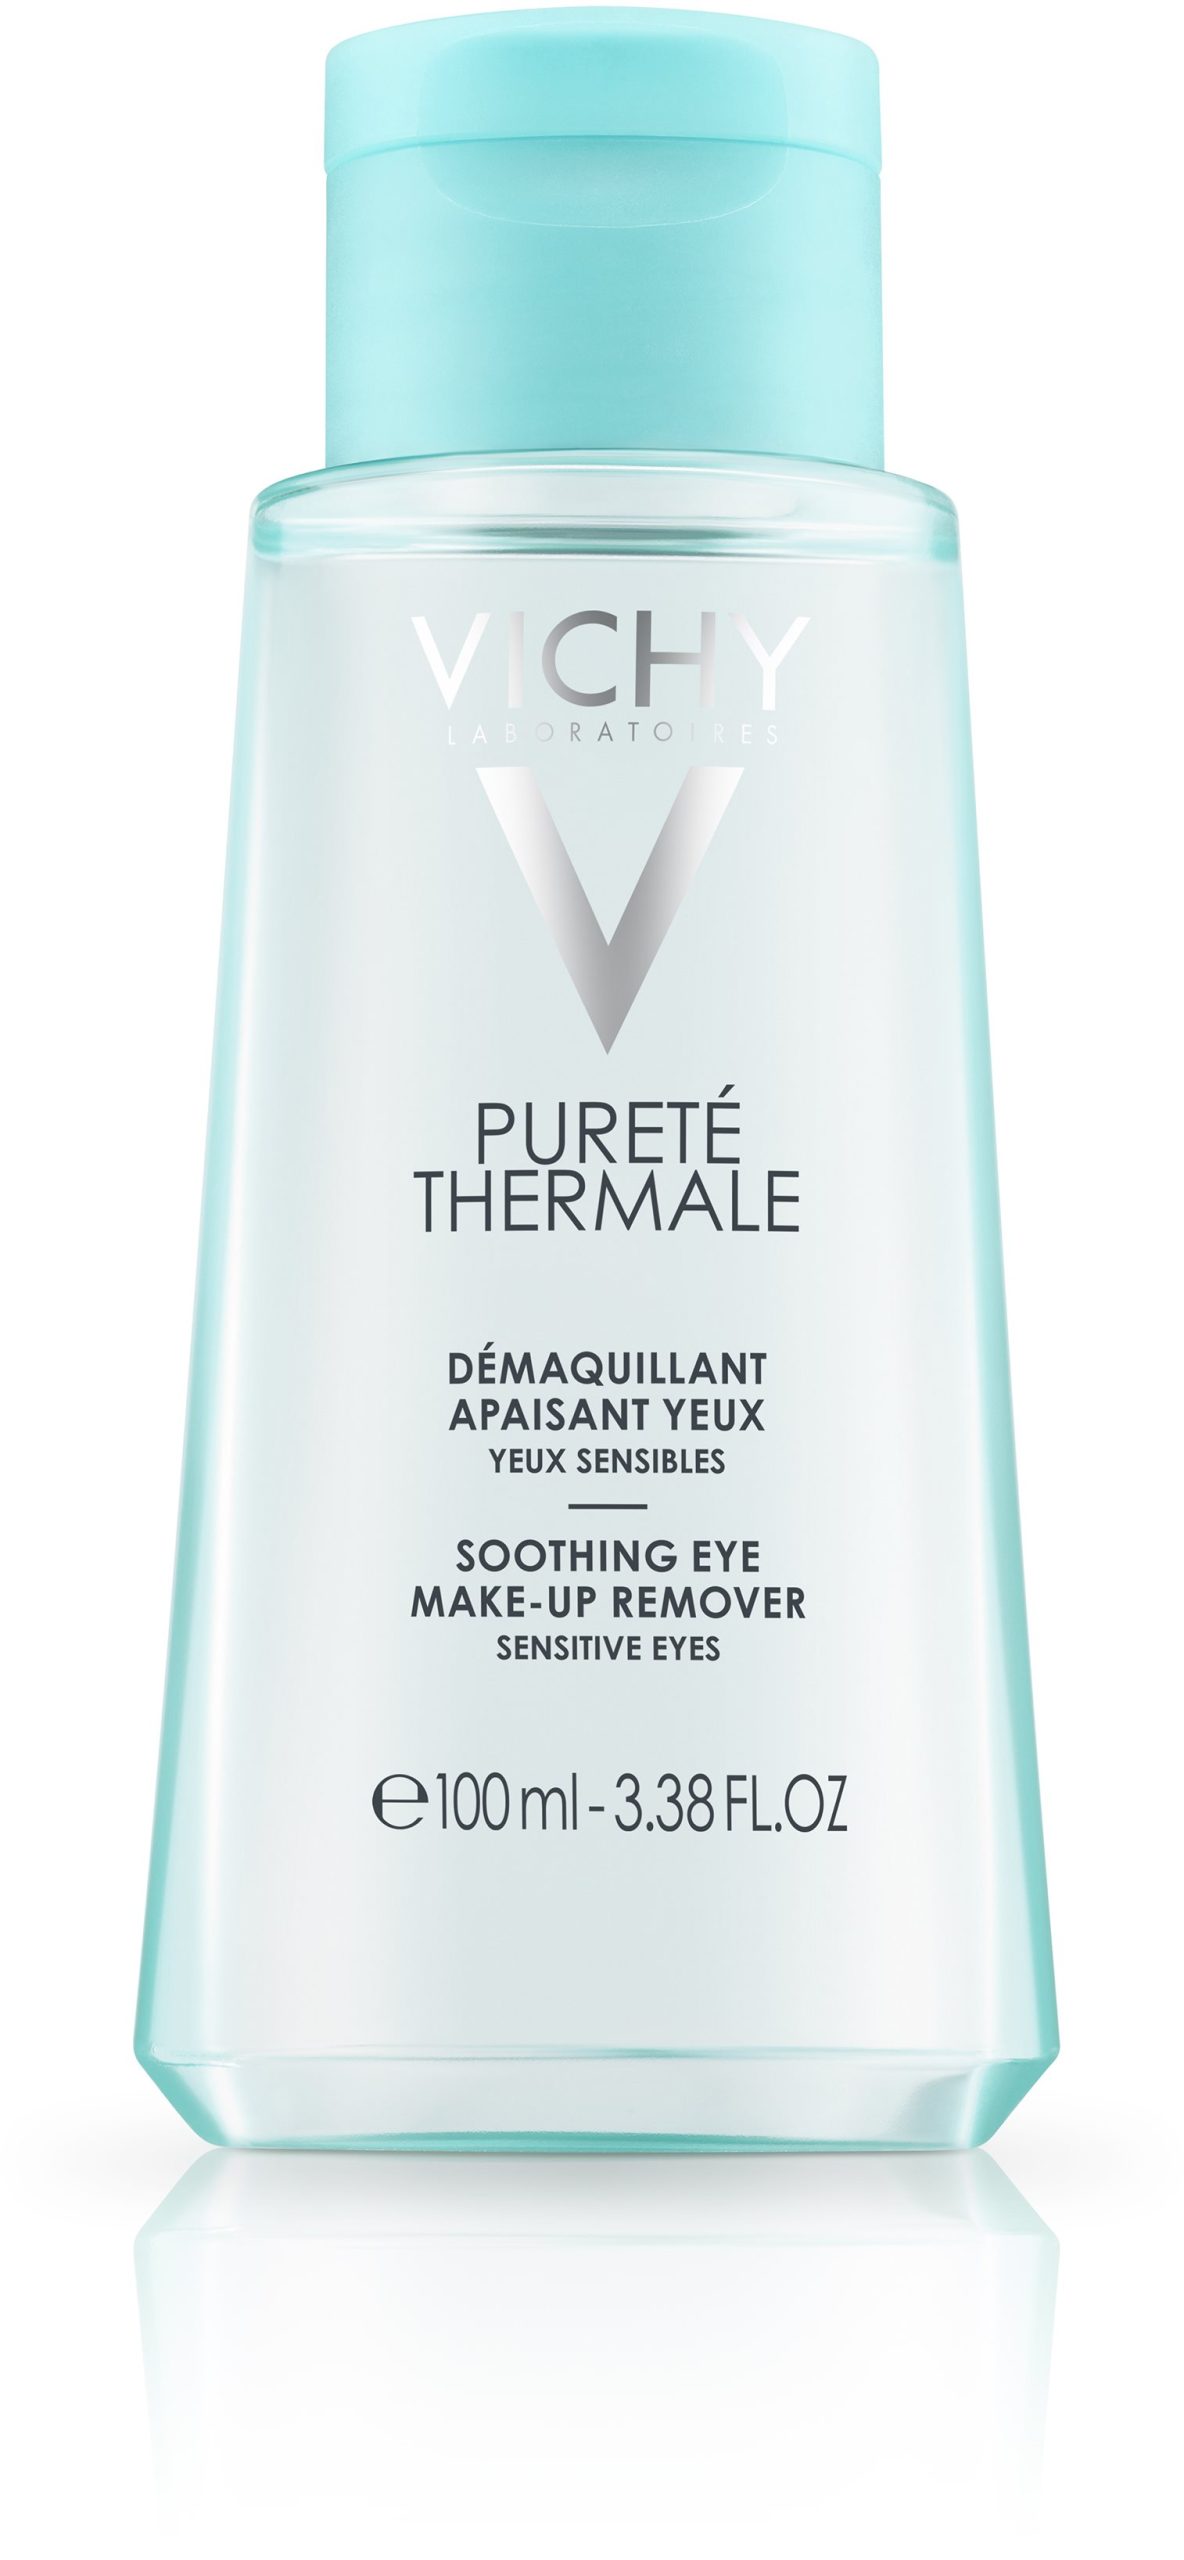 Sminklemosó VICHY Pureté Thermale Soothing Eye Make-Up Remover 100 ml